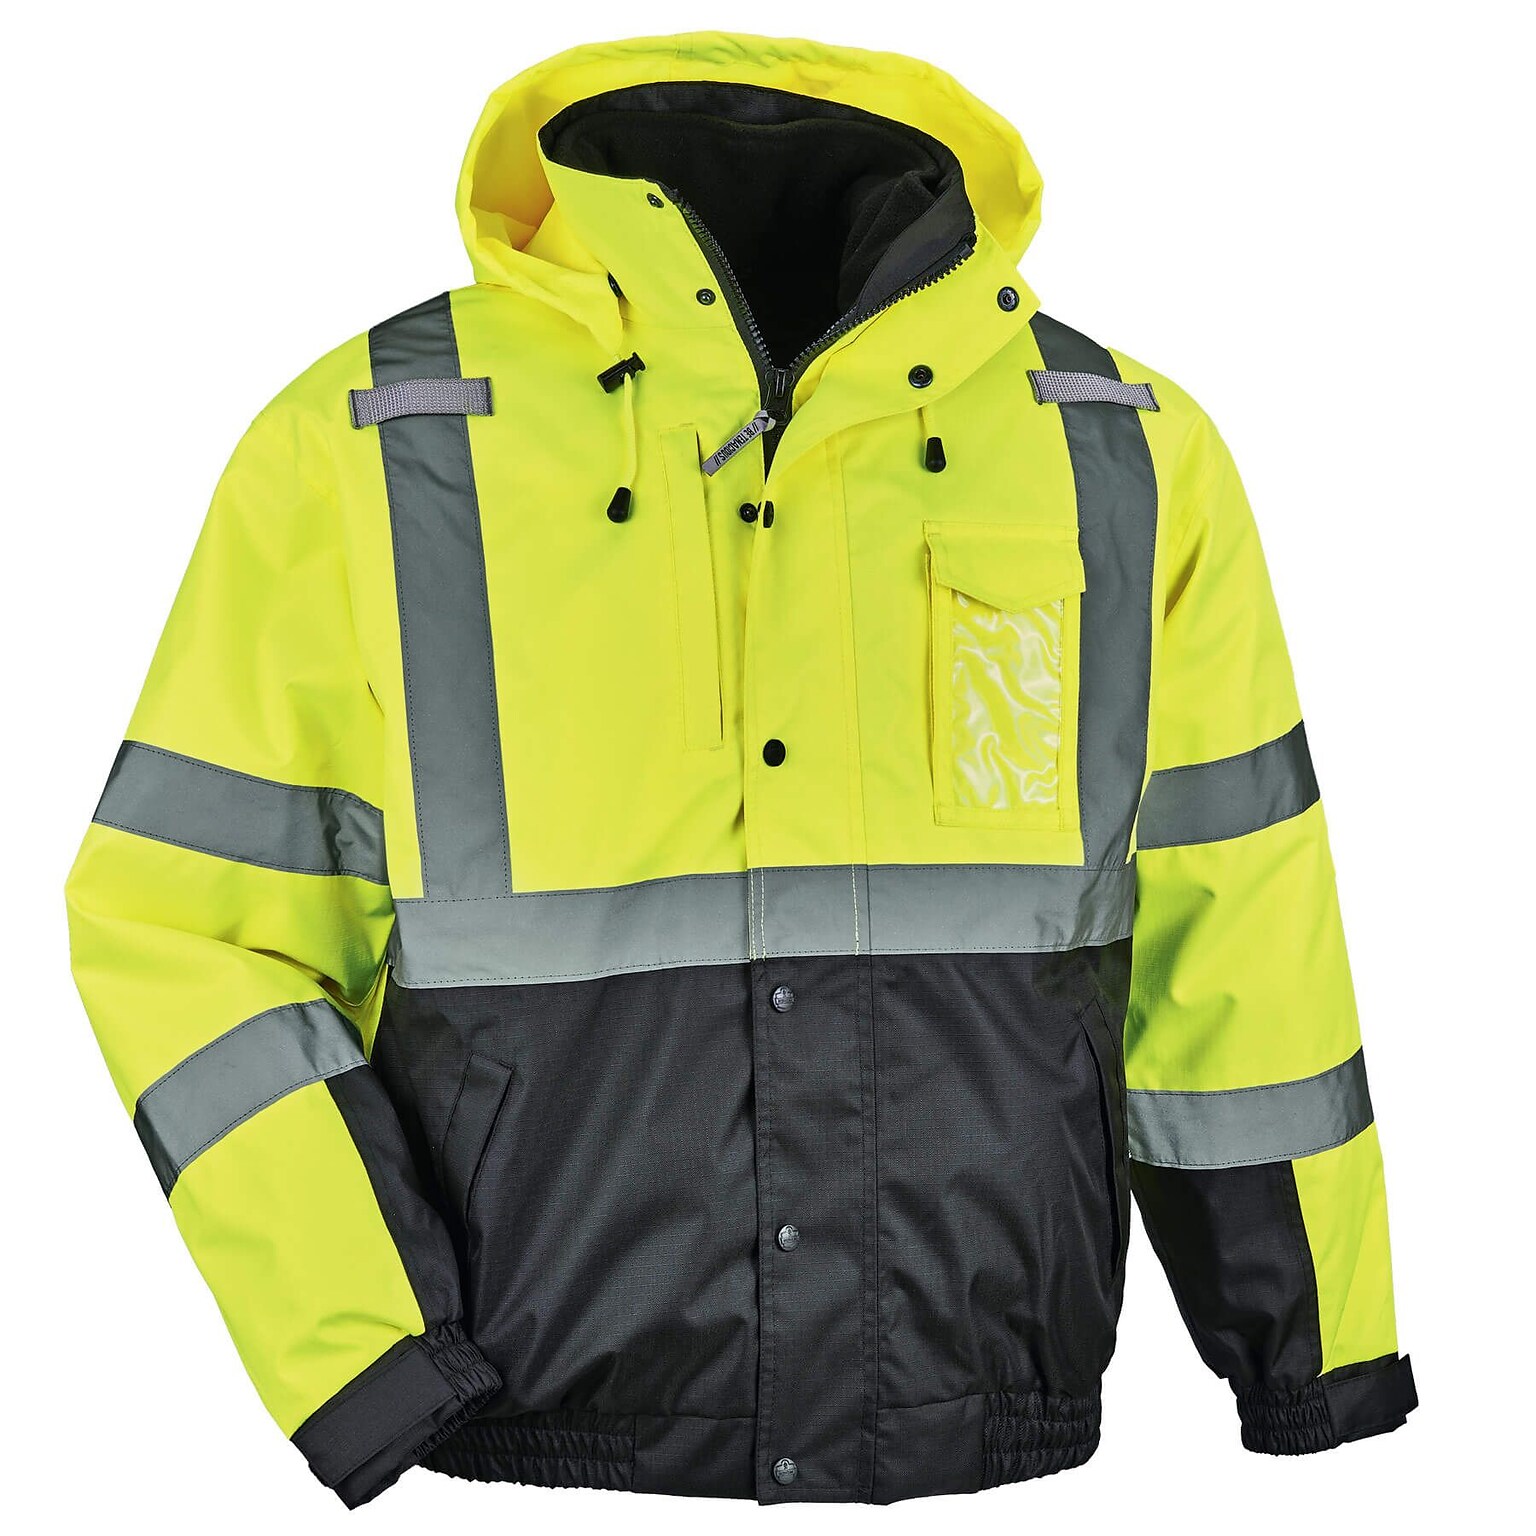 GloWear 8381 Performance 3-in-1 Bomber Jacket, ANSI Class R3, Lime, Extra Large (25595)